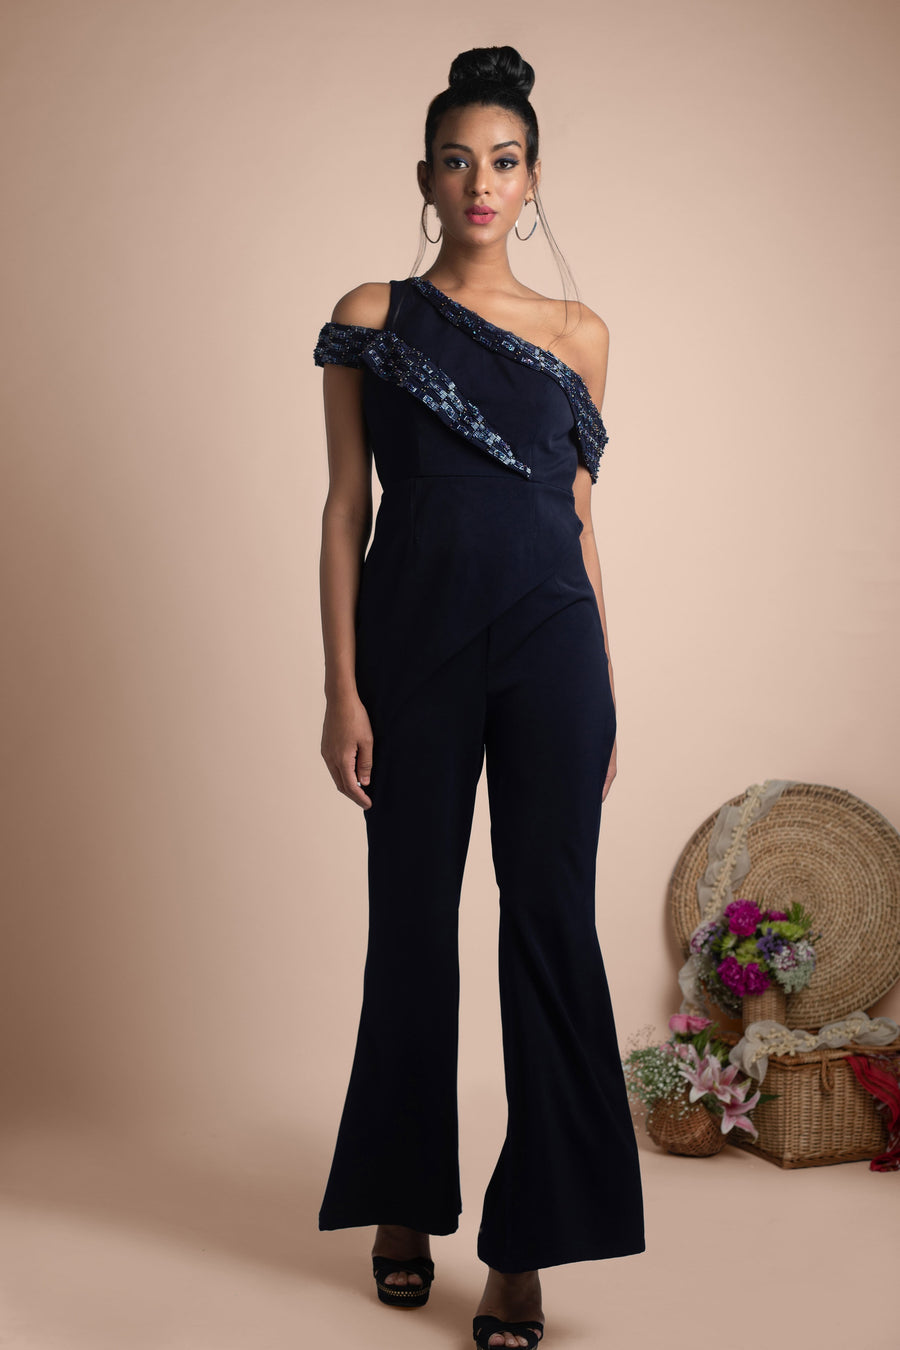 Mehak Murpana| Jacket Top & Bell Bottoms | Stylish formal and party wear.